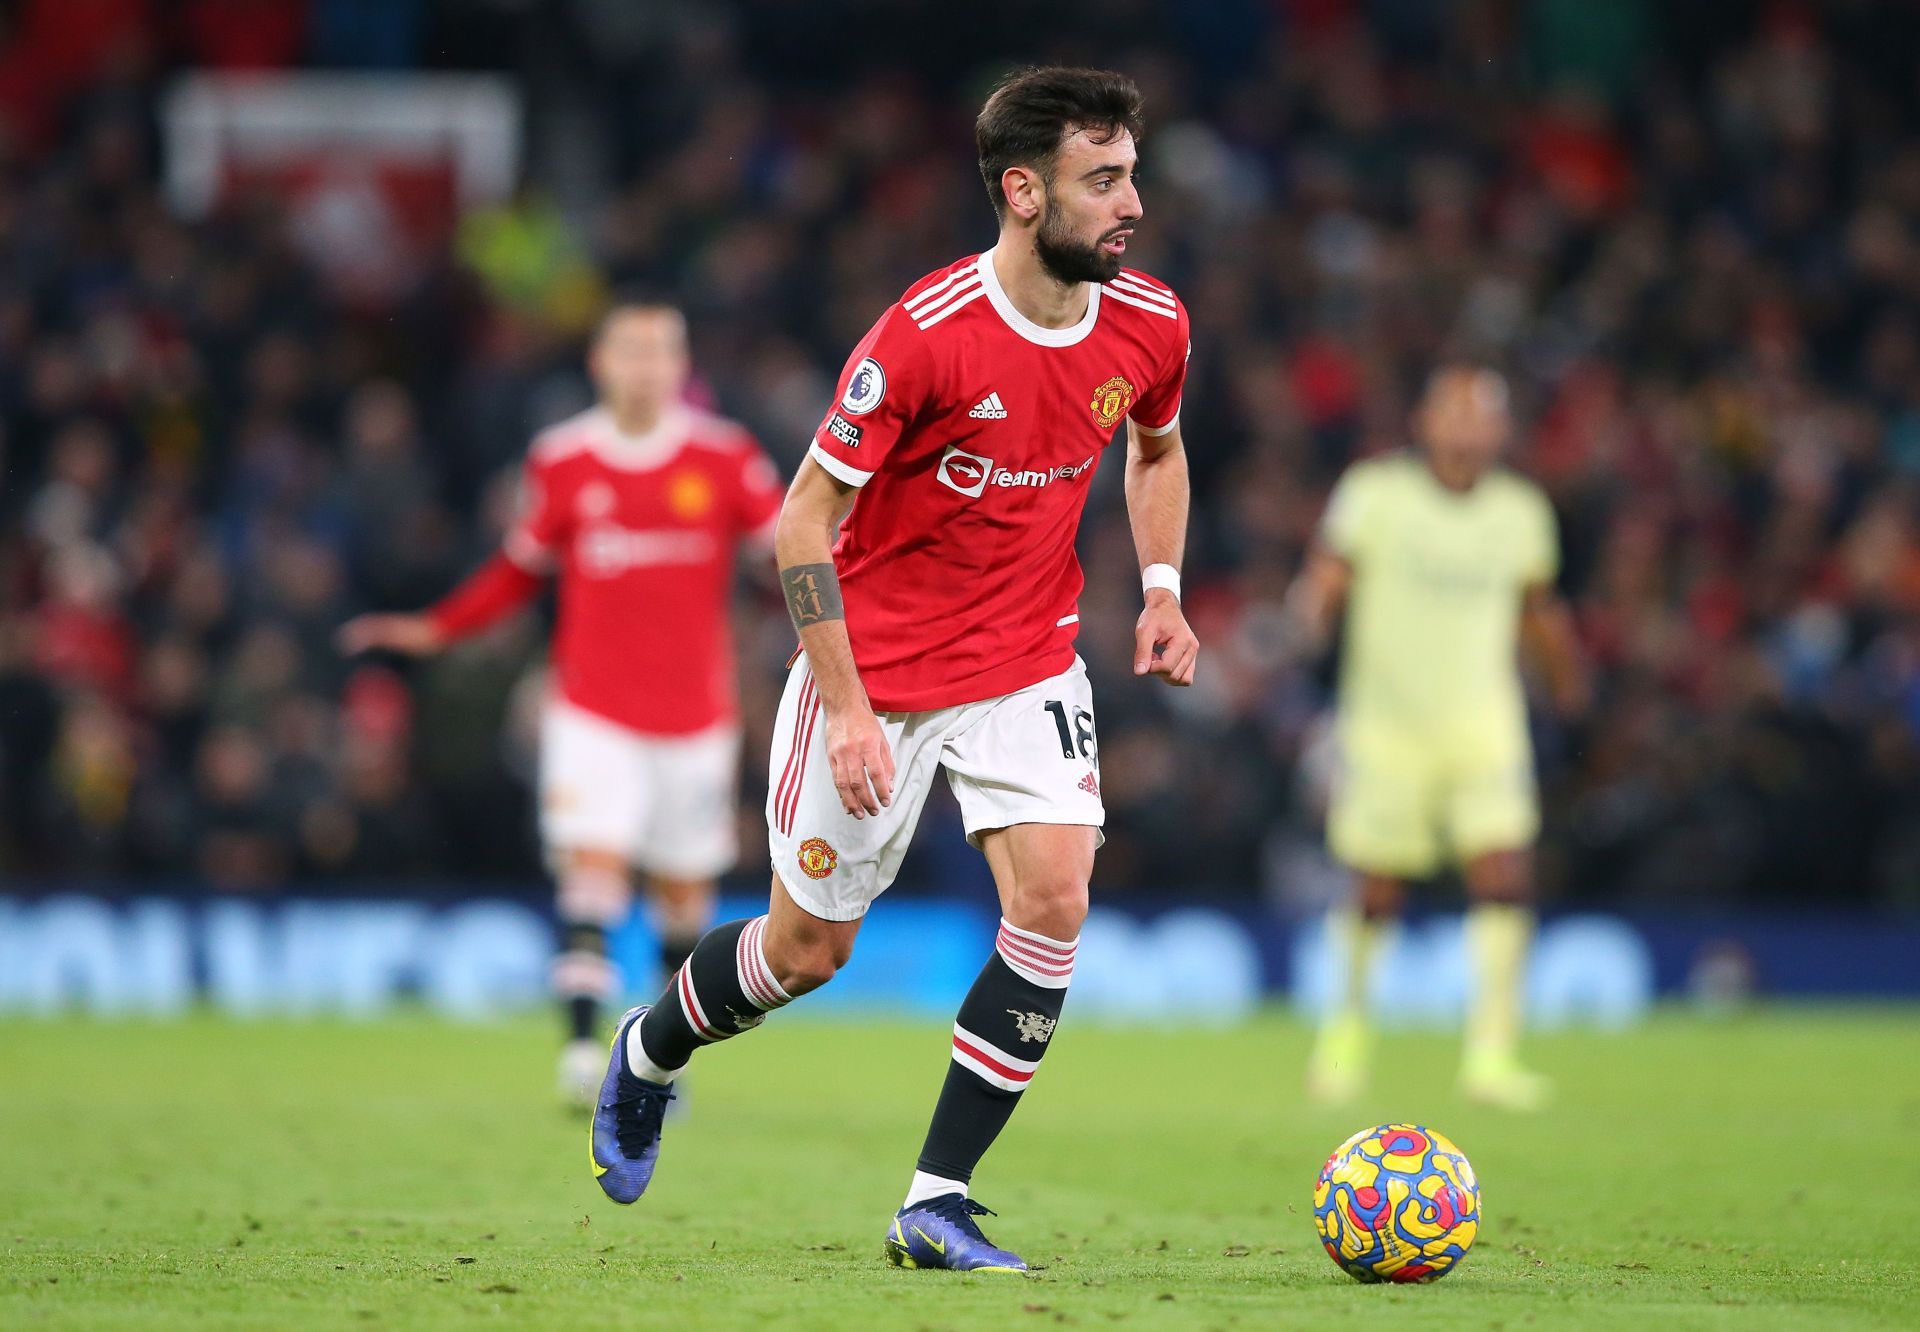 Bruno Fernandes has been fantastic for Manchester United and should be rewarded with a spot in the FIFPro World XI.